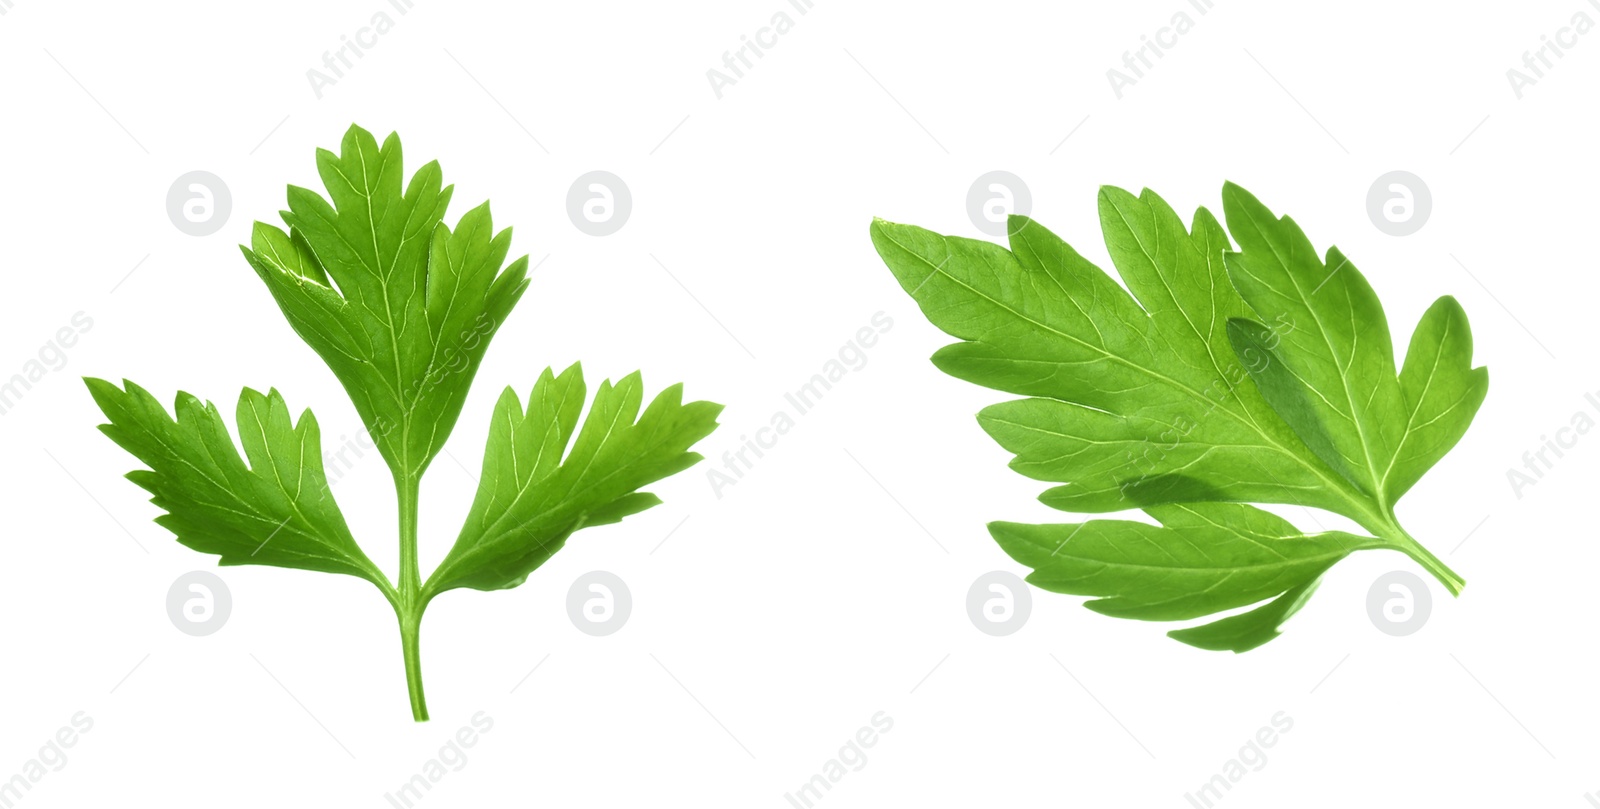 Image of Two green parsley leaves on white background